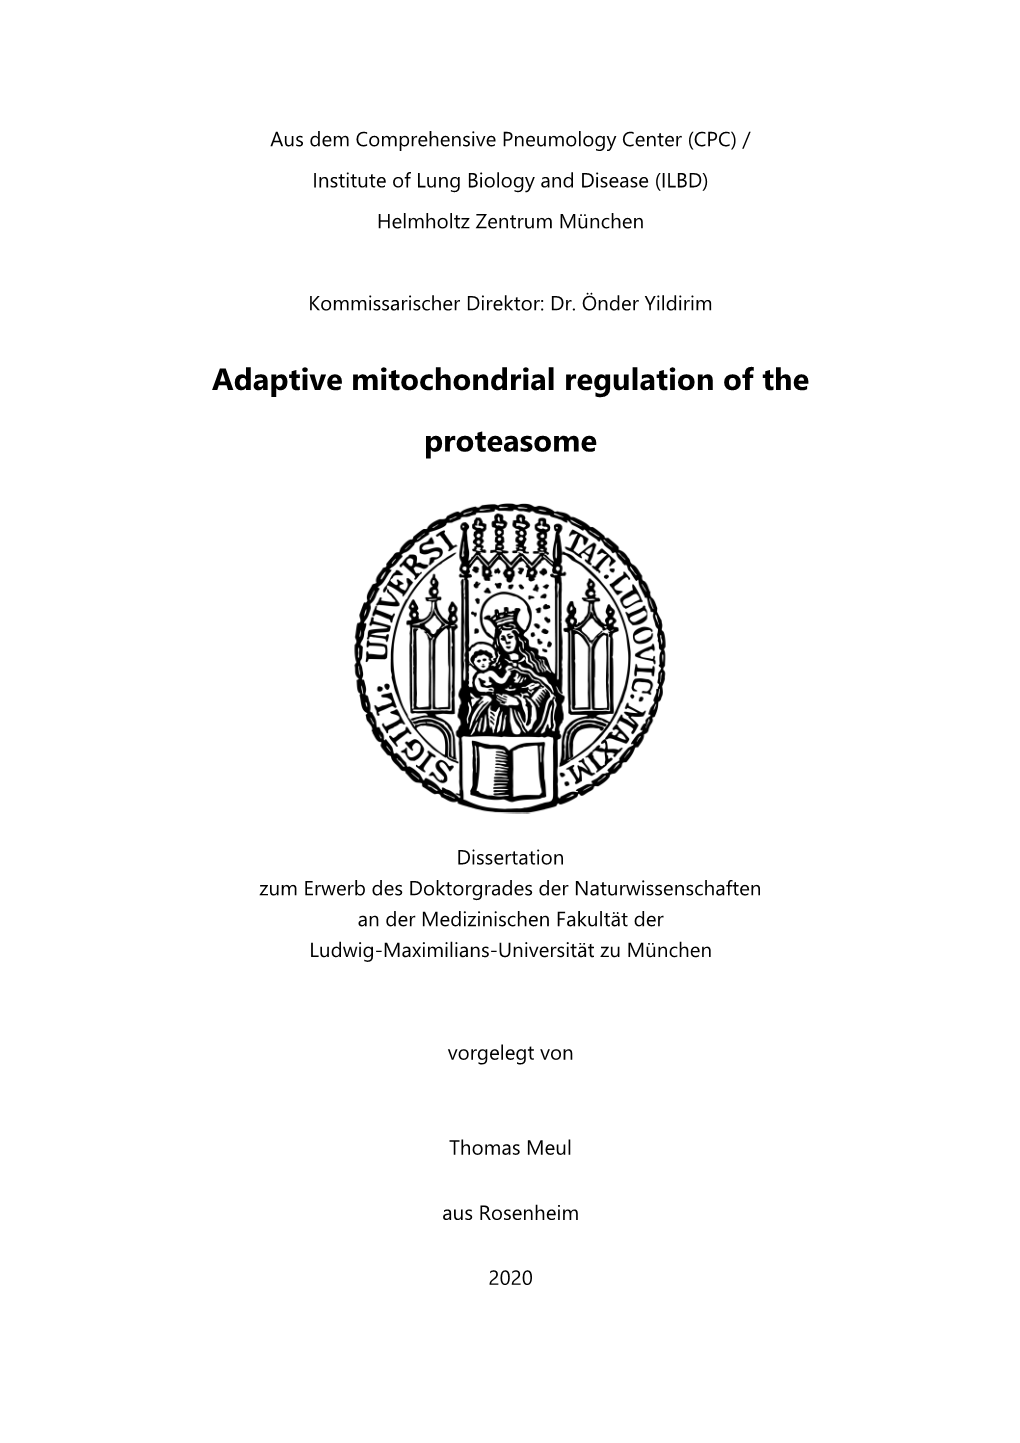 Adaptive Mitochondrial Regulation of the Proteasome